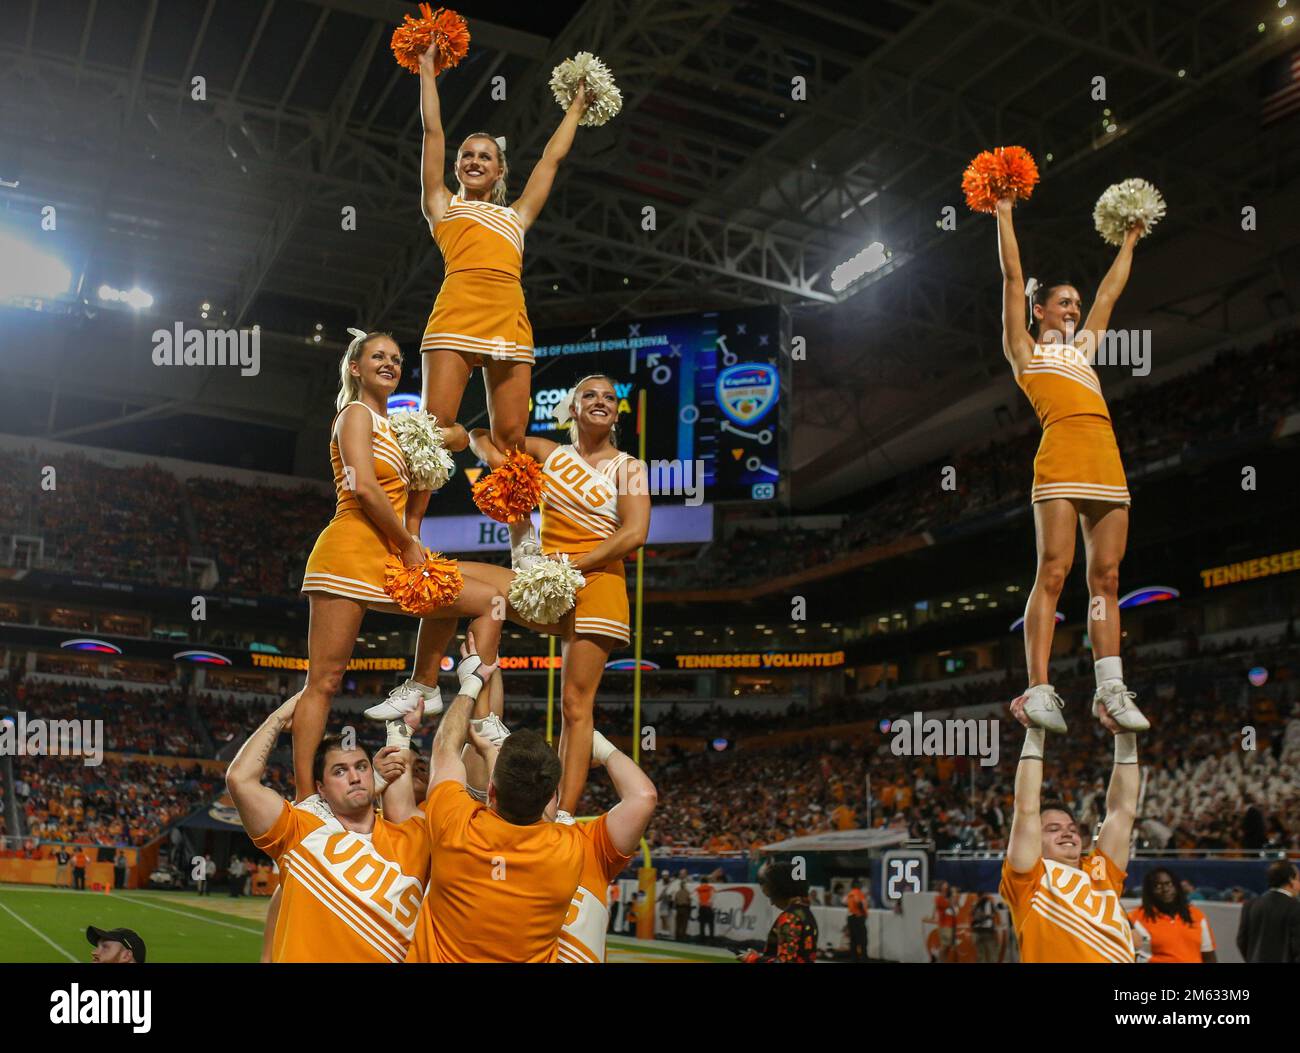 Miami Gardens, FL, USA. 30th Dec, 2022. The Tennessee cheerleaders perform partners stunts on the sidelines during the 2022 Capital One Orange Bowl football game between the Clemson Tigers and Tennessee Volunteers at Hard Rock Stadium in Miami Gardens, FL. Kyle Okita/CSM/Alamy Live News Stock Photo